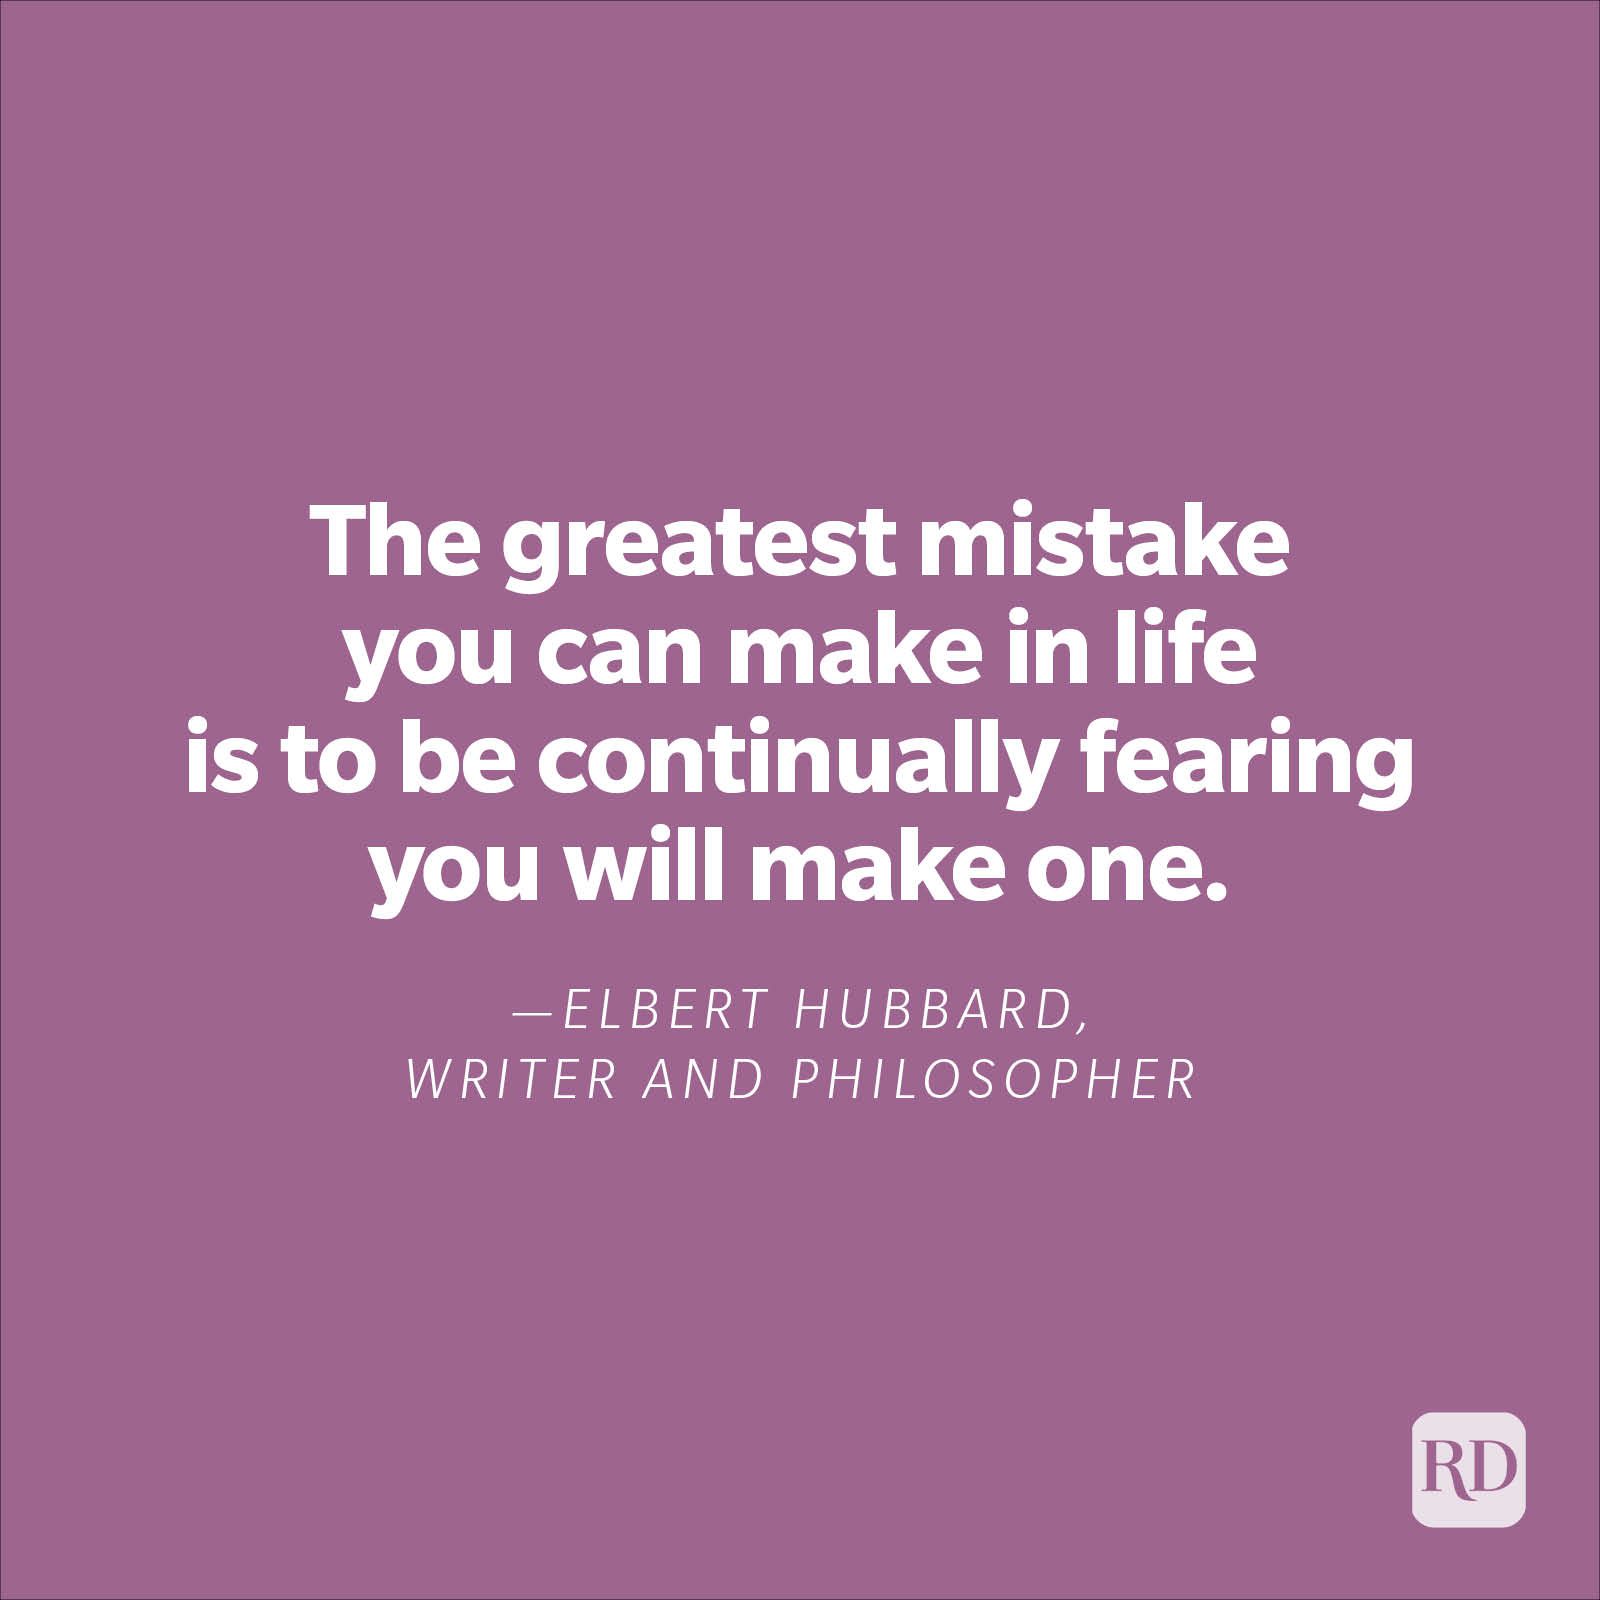 "The greatest mistake you can make in life is to be continually fearing you will make one."—Elbert Hubbard, writer, and philosopher.